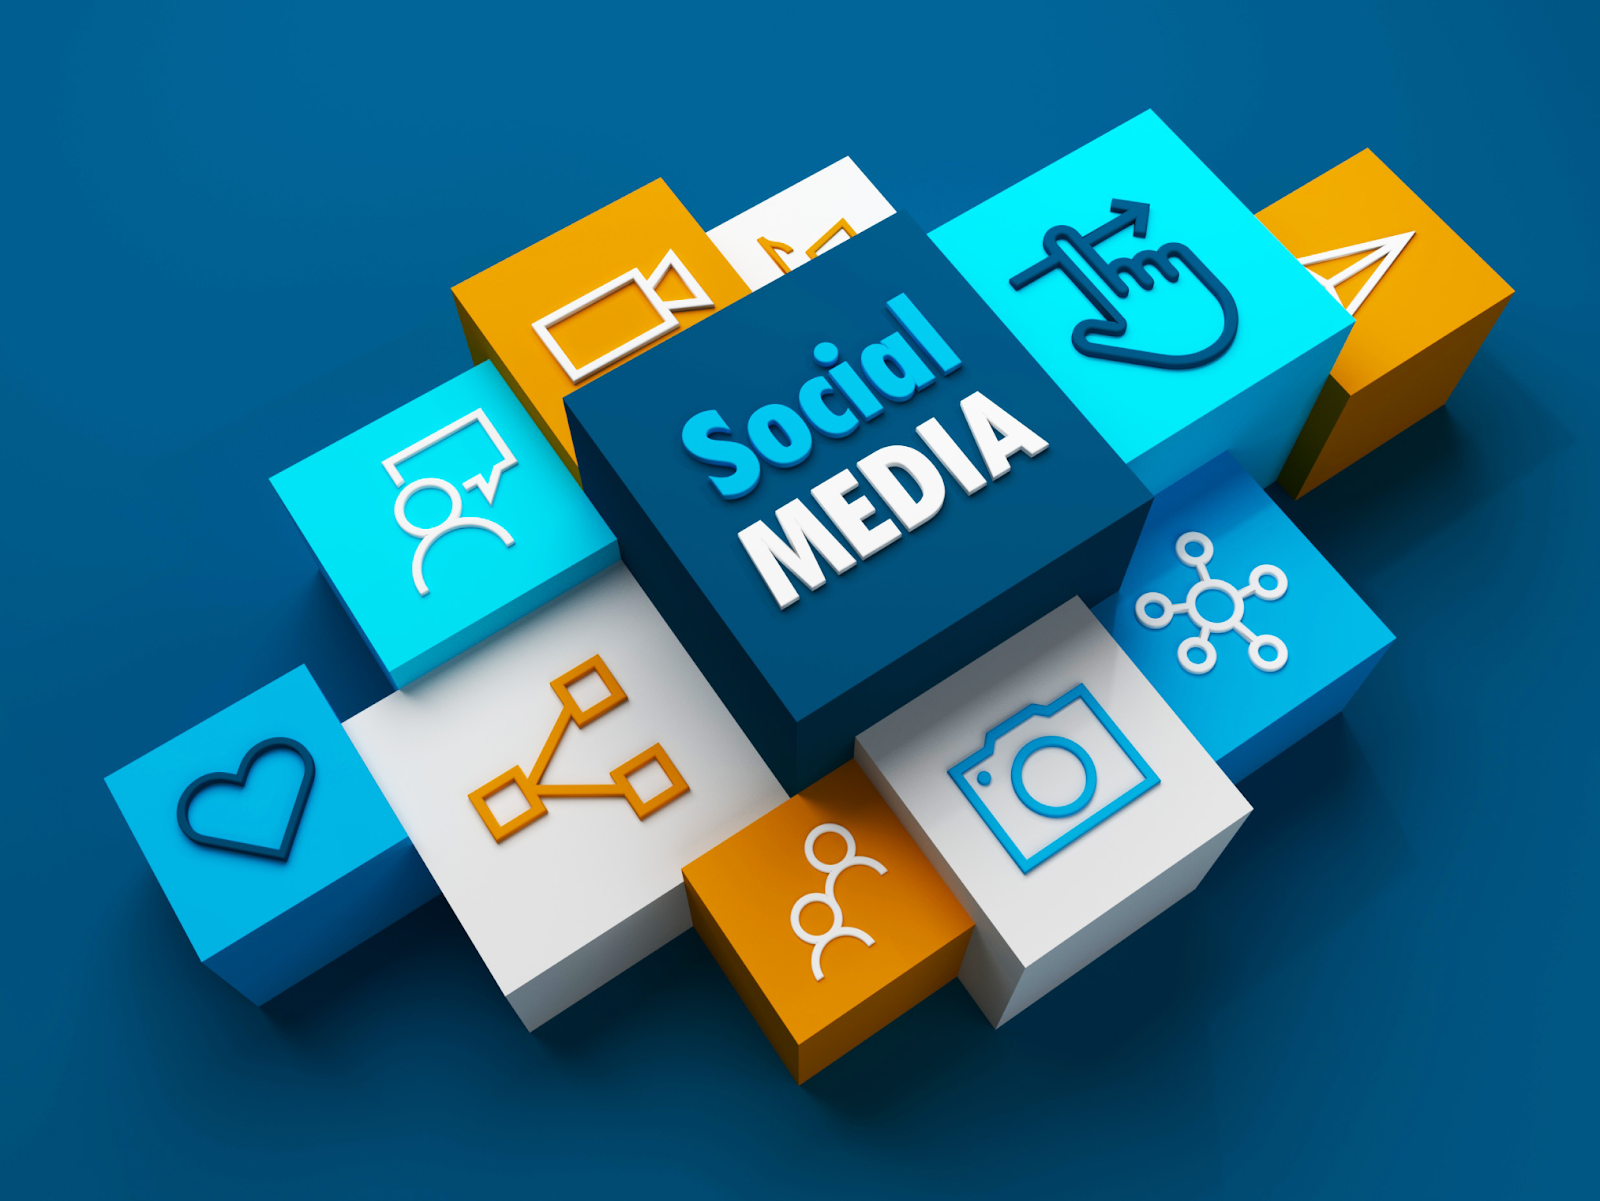 3D blocks with social media icons and the words 'Social Media', representing the integration of different online platforms for reputation enhancement.